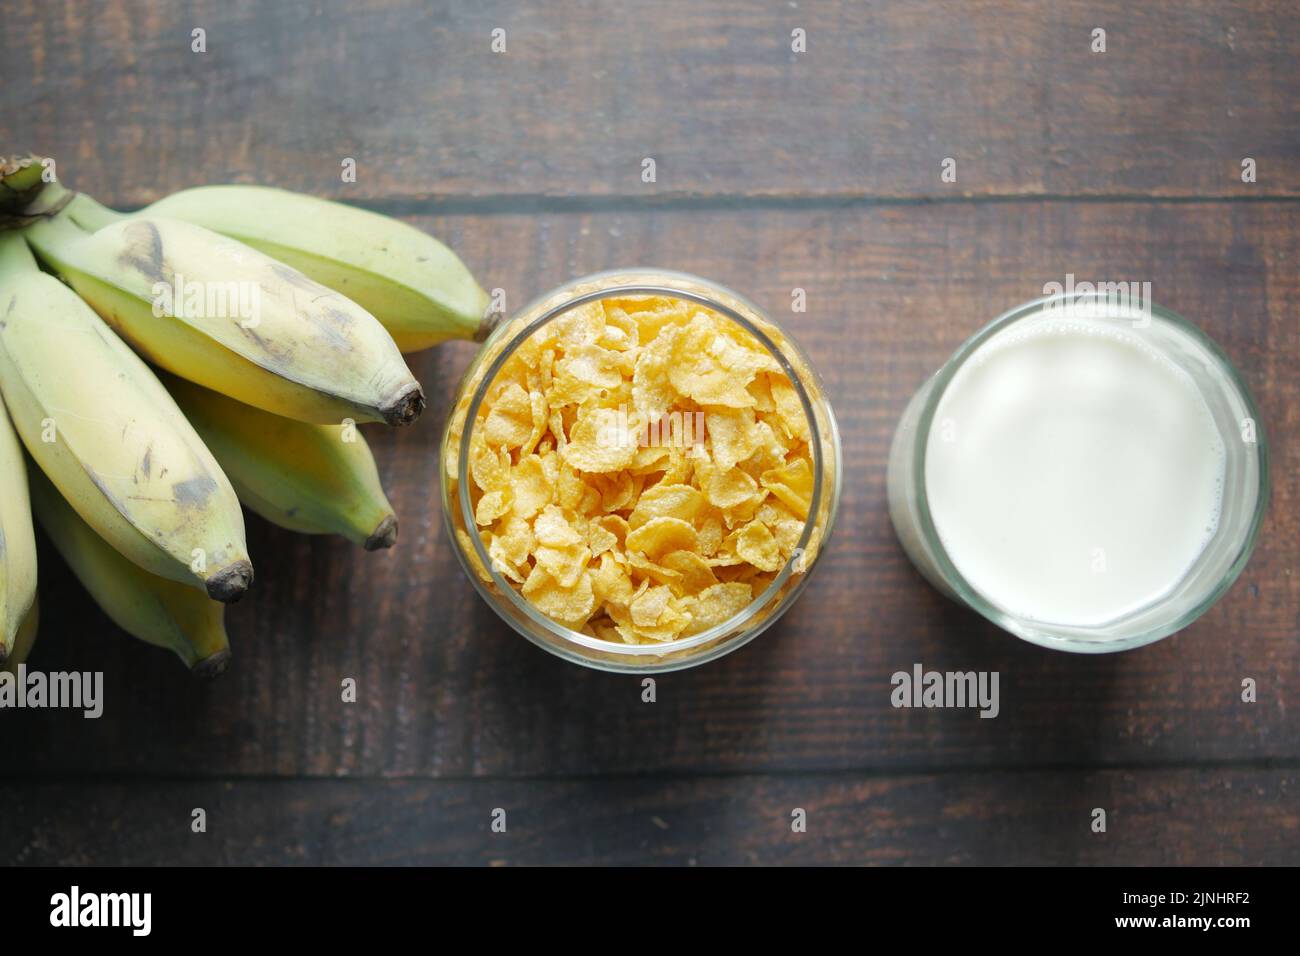 Top view of corn flakes , banana and milk on table  Stock Photo